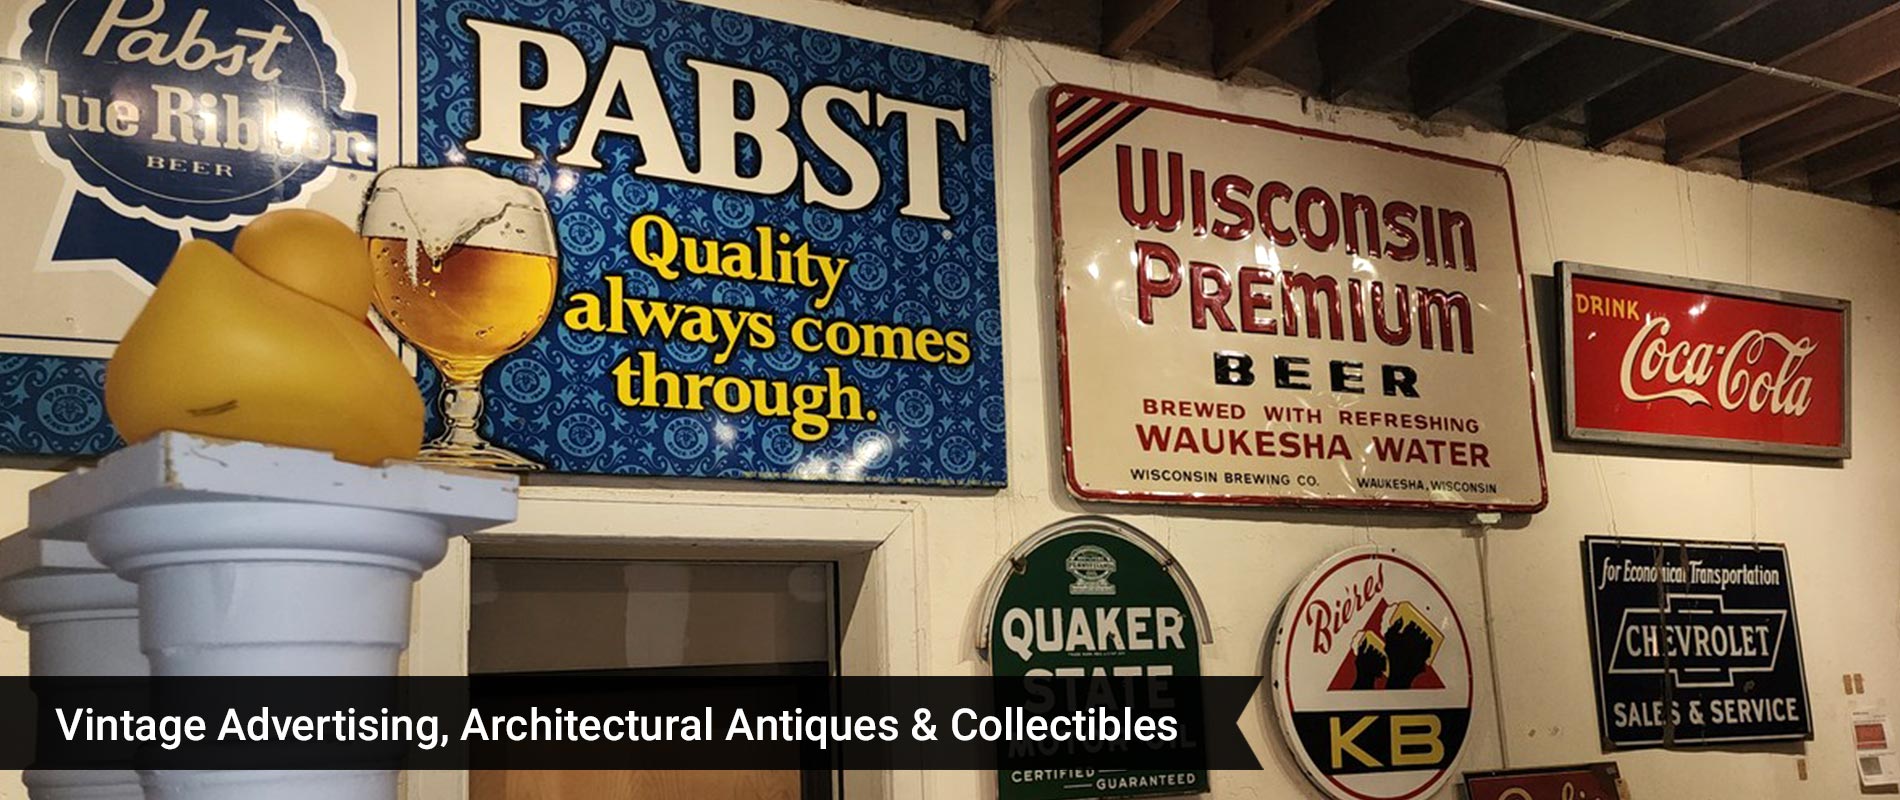 Vintage Advertising, Architectural Antiques & Collectibles